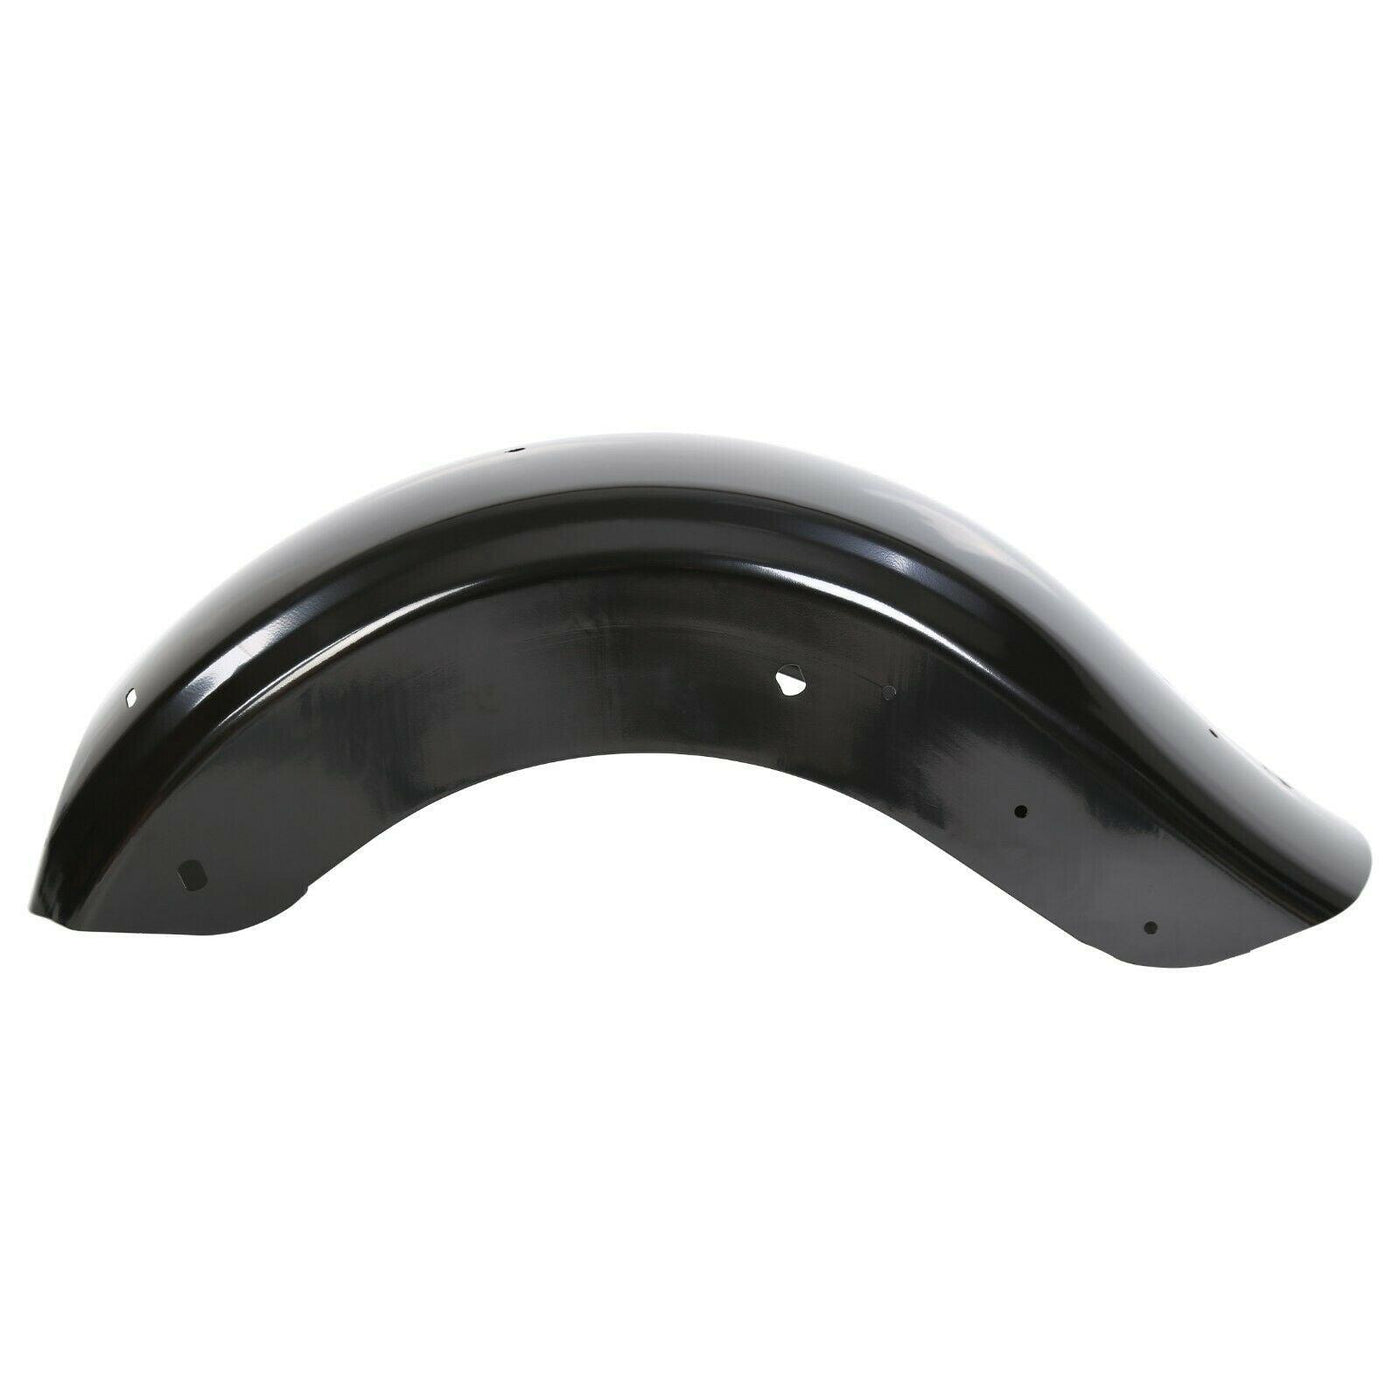 CVO Style Rear Fender System Kit Extension Fascia For Harley Touring 09-13 - Moto Life Products